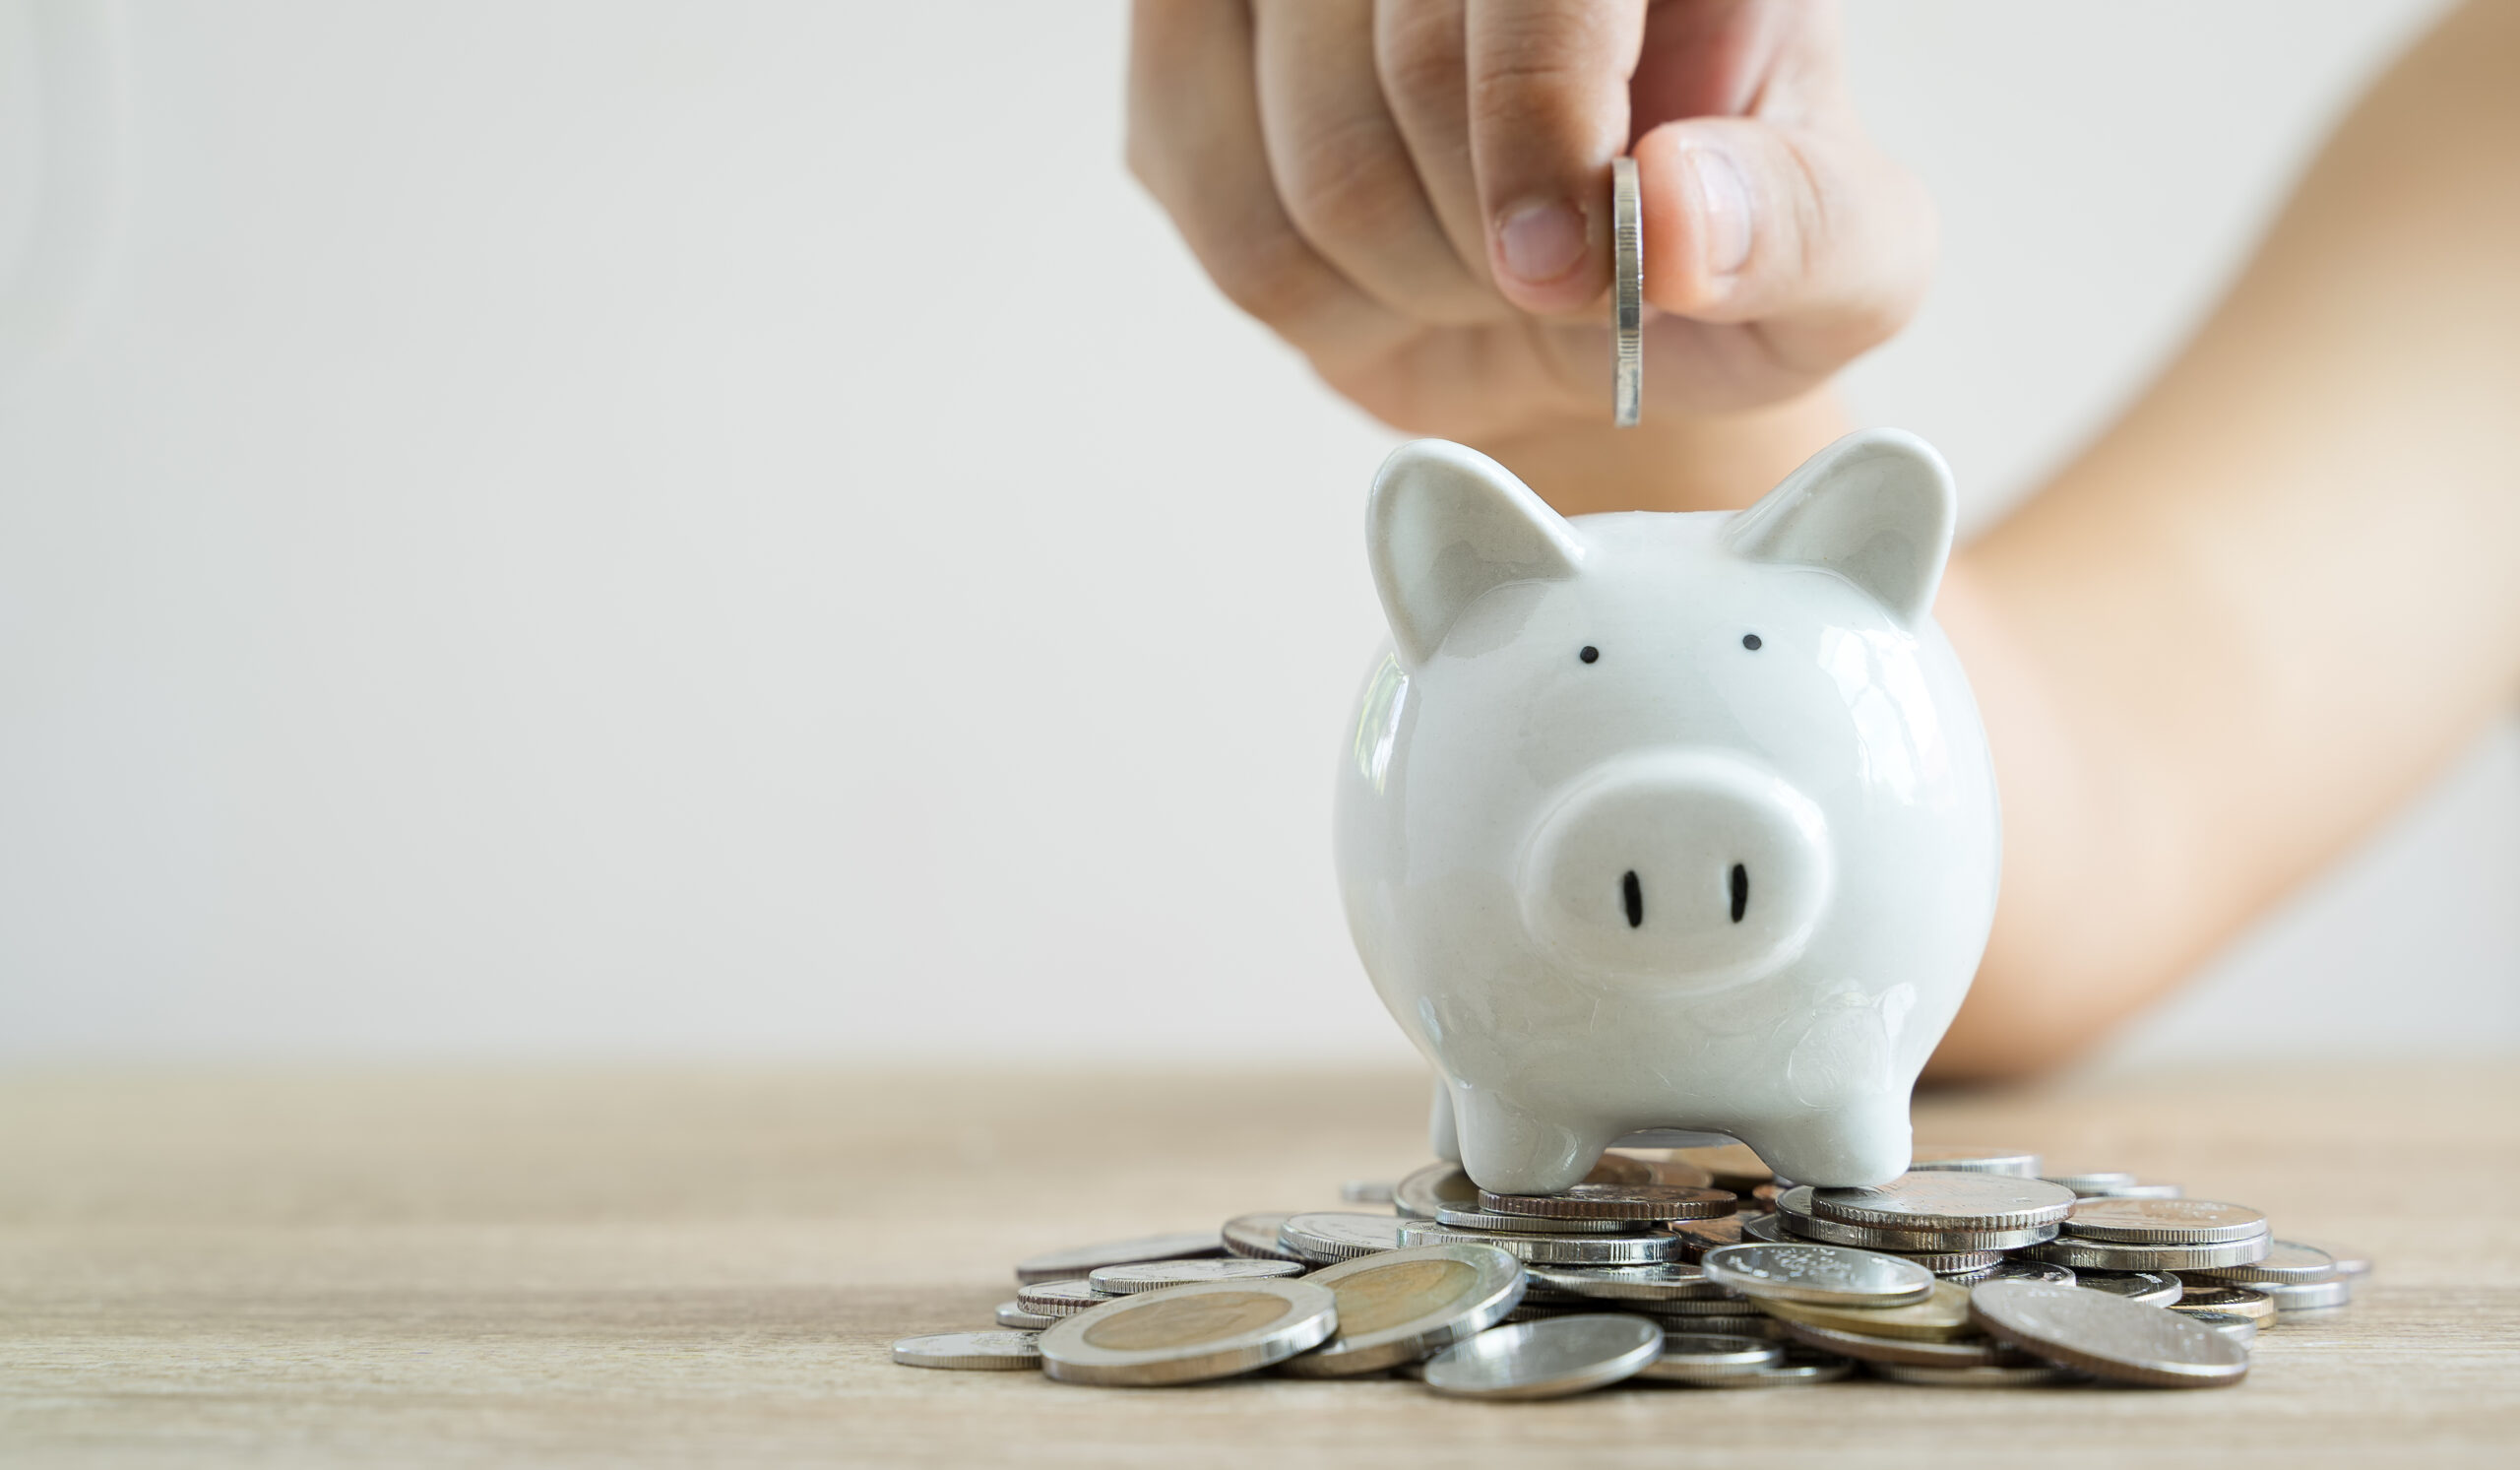 Emergency Fund Planning: 5 Steps to Calculate How Much You Should Save, Part 2